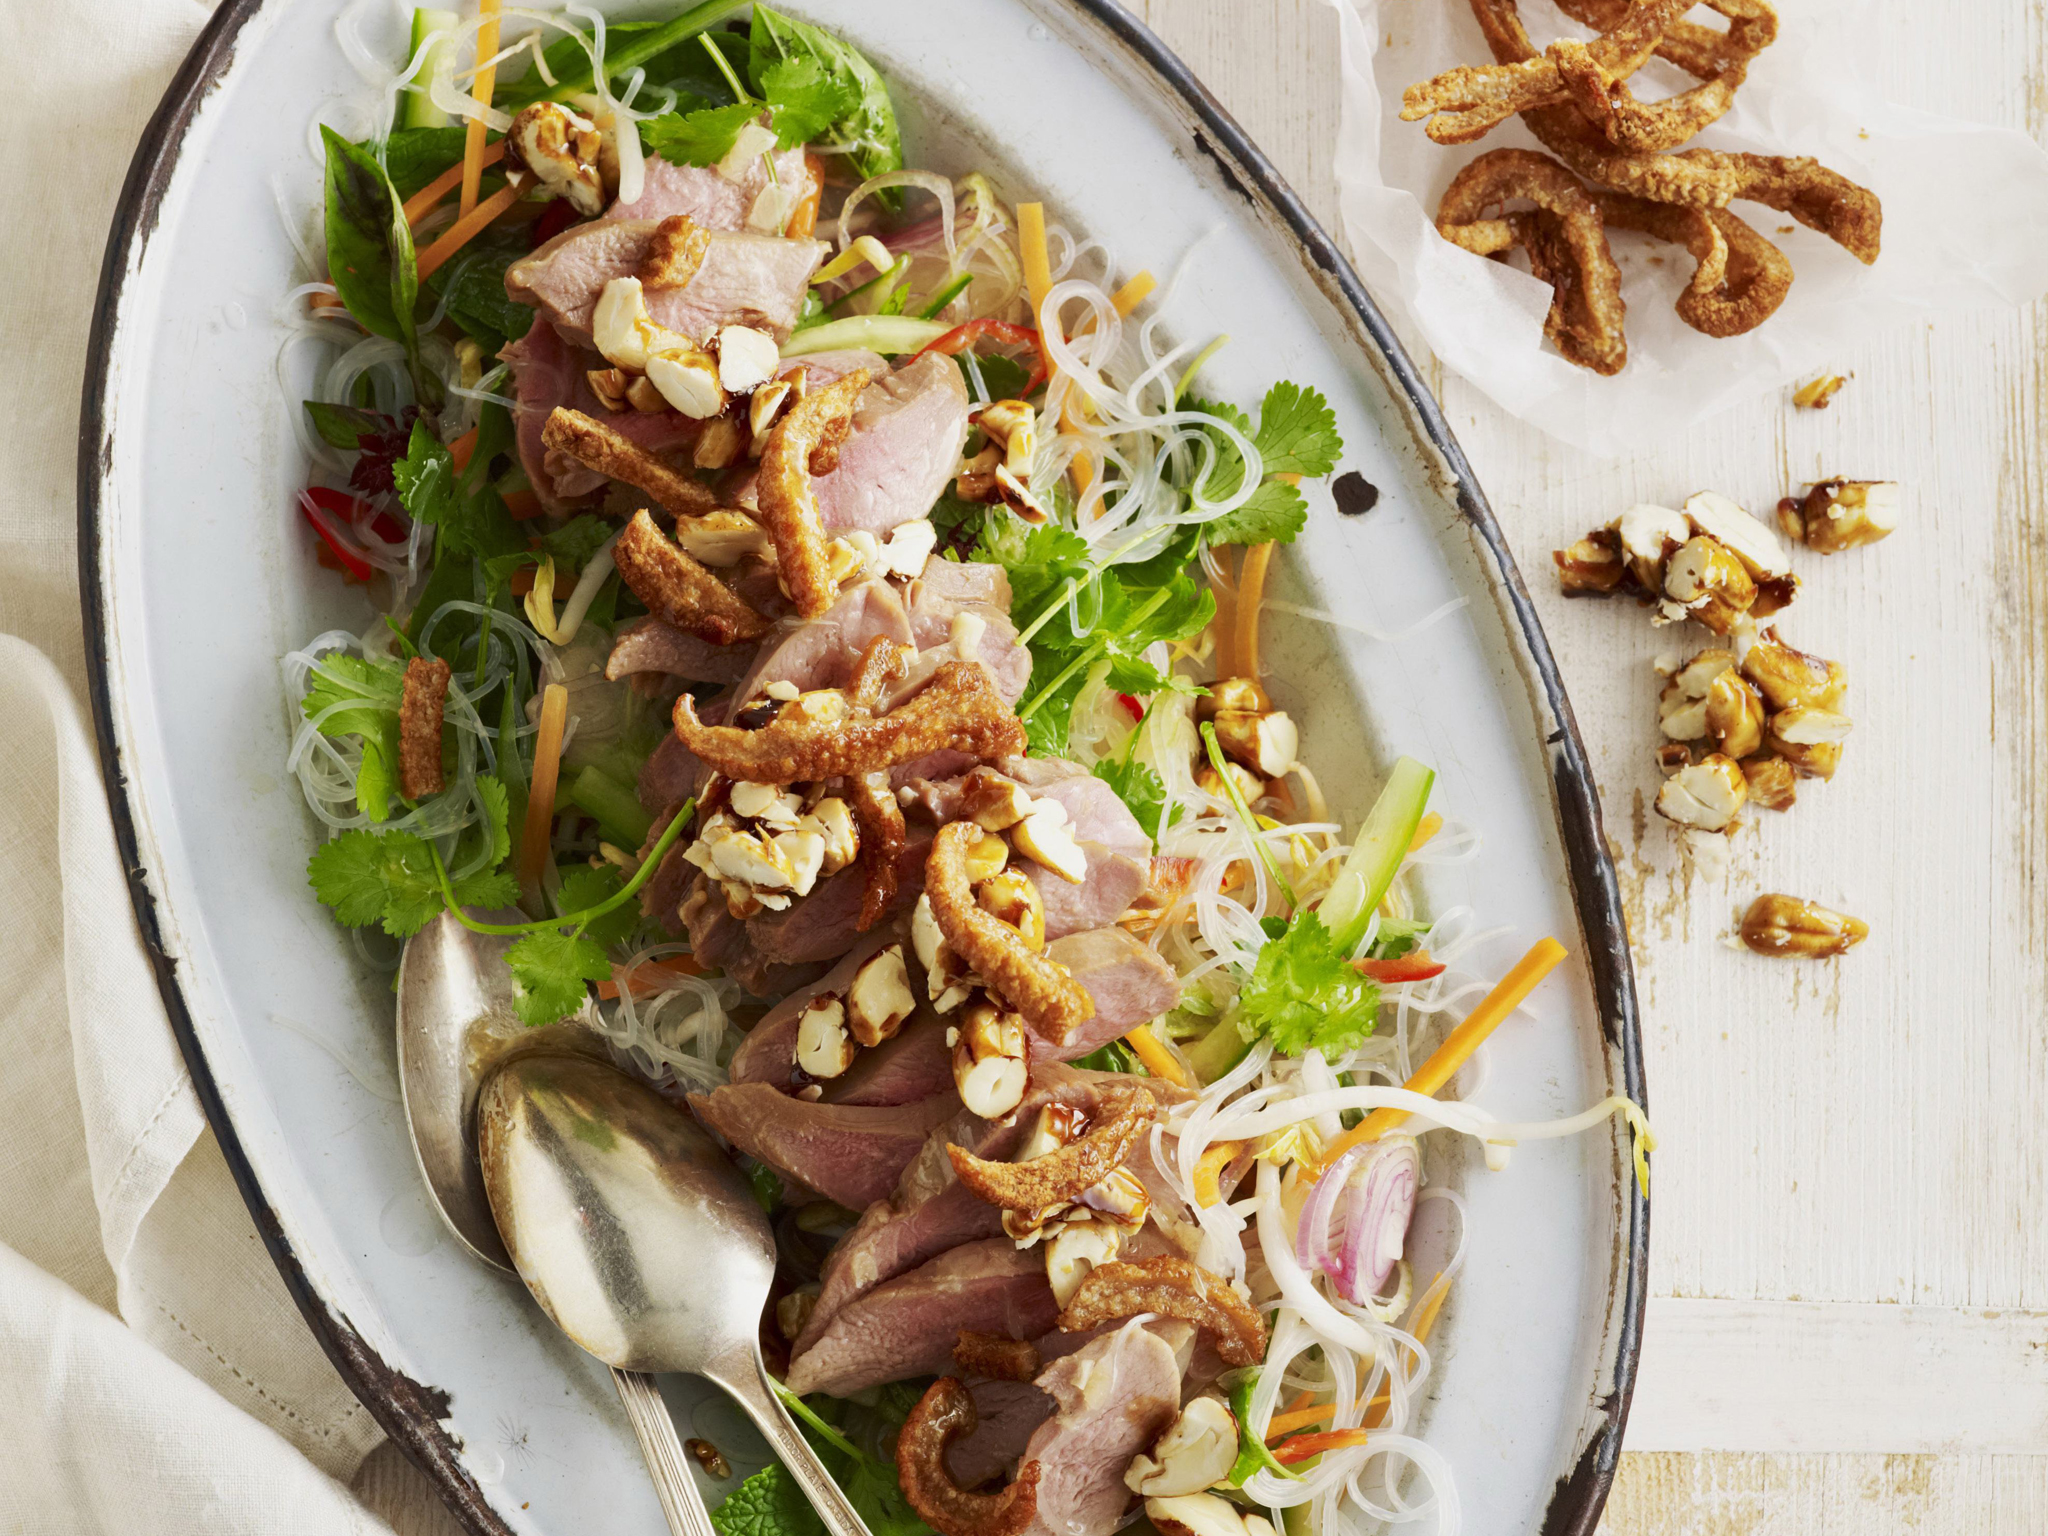 POACHED DUCK AND CASHEW SALAD WITH DUCK CRACKLING